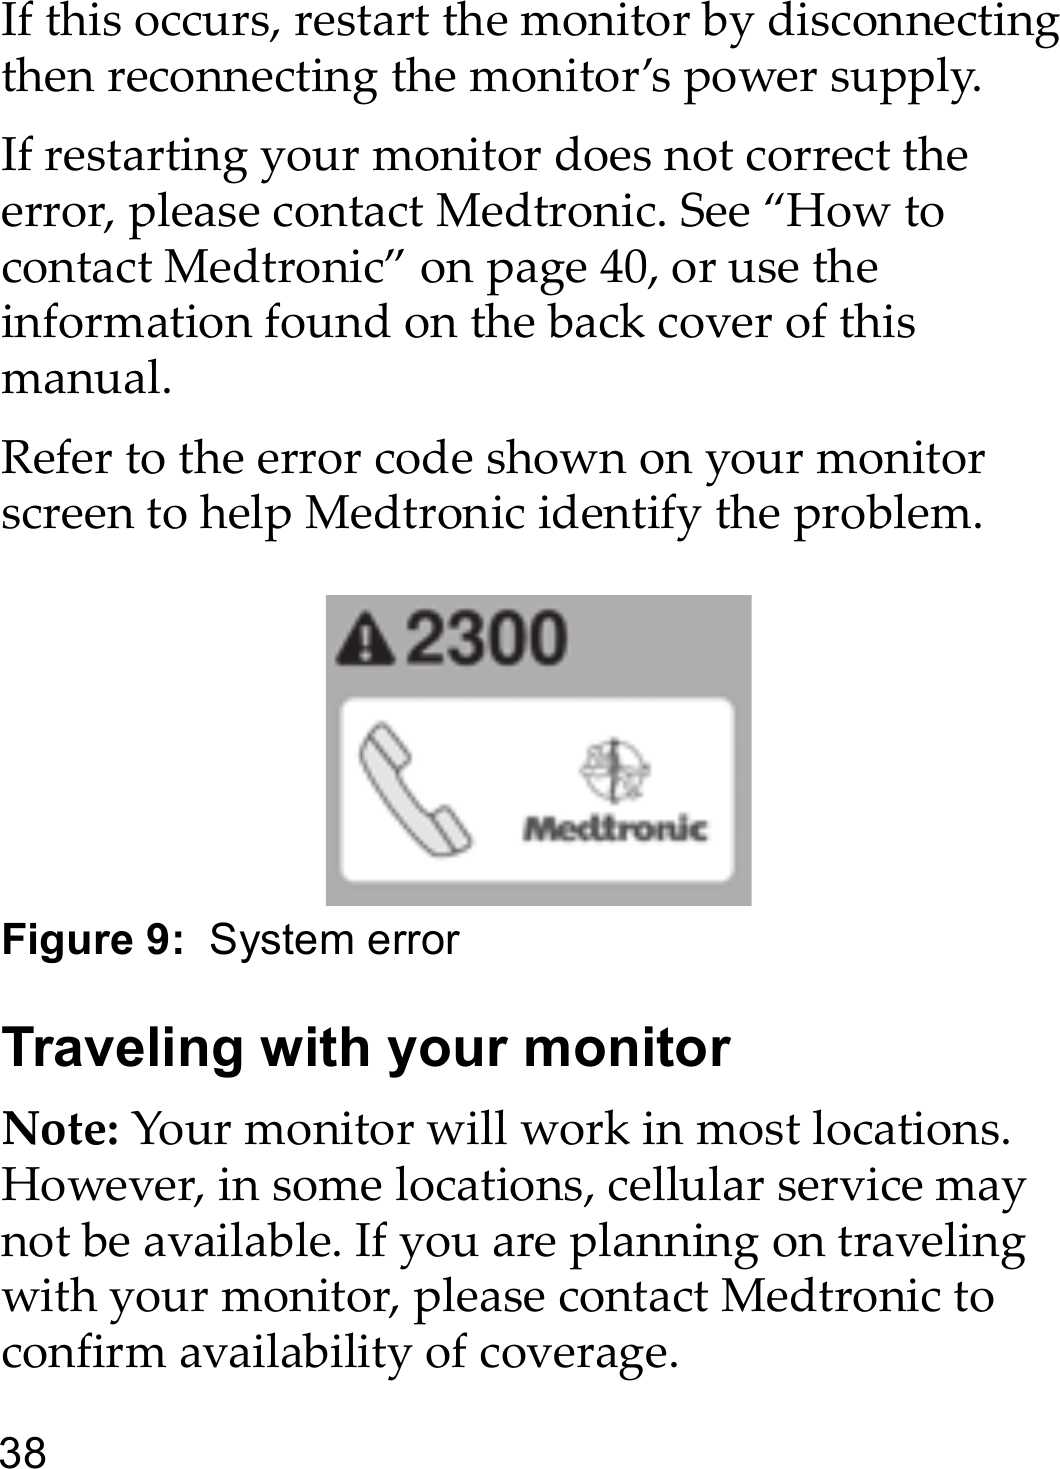 38If this occurs, restart the monitor by disconnecting then reconnecting the monitor’s power supply.If restarting your monitor does not correct the error, please contact Medtronic. See “How to contact Medtronic” on page 40, or use the information found on the back cover of this manual. Refer to the error code shown on your monitor screen to help Medtronic identify the problem.Figure 9:  System errorTraveling with your monitorNote: Your monitor will work in most locations. However, in some locations, cellular service may not be available. If you are planning on traveling with your monitor, please contact Medtronic to confirm availability of coverage.